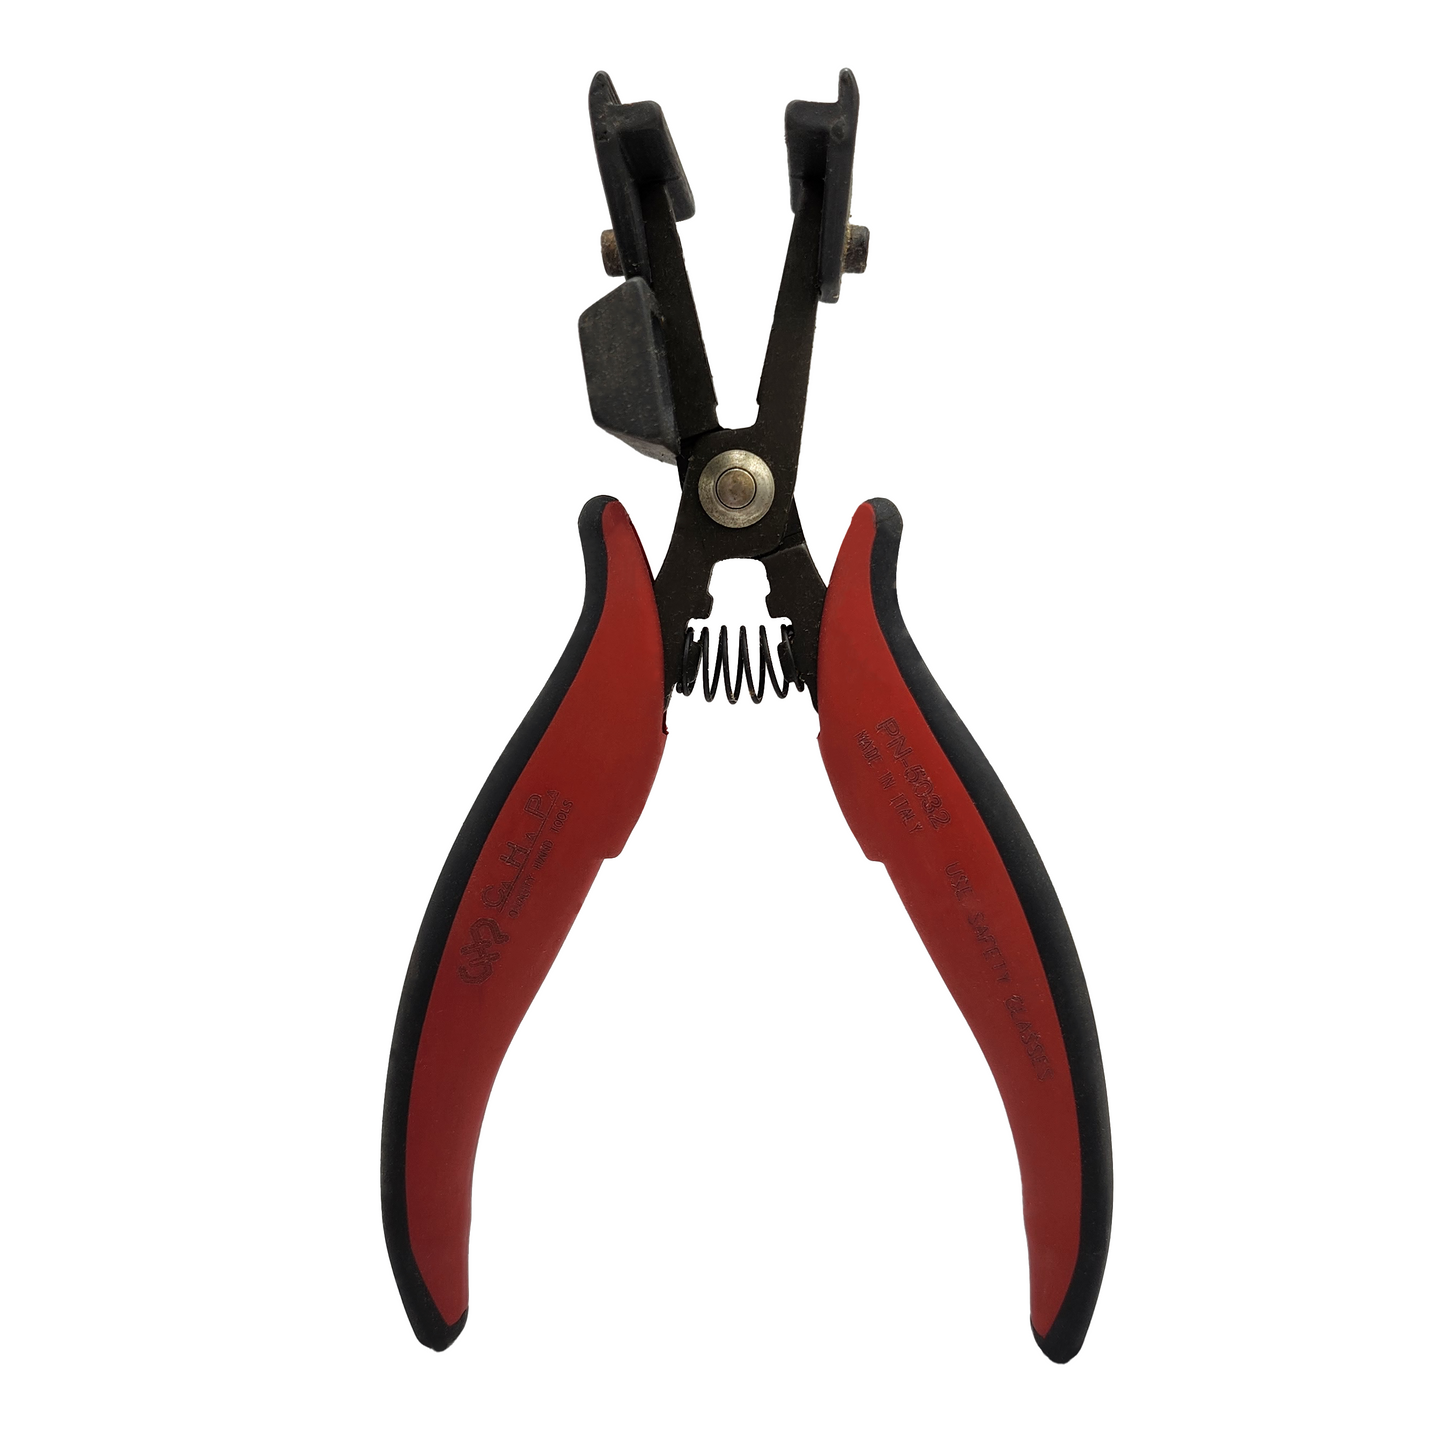 CHP_ CHP PN-5032 Pin Extractor (22-32pins)_ Cutters, Pliers, Multi-Tools_ Hakko Products